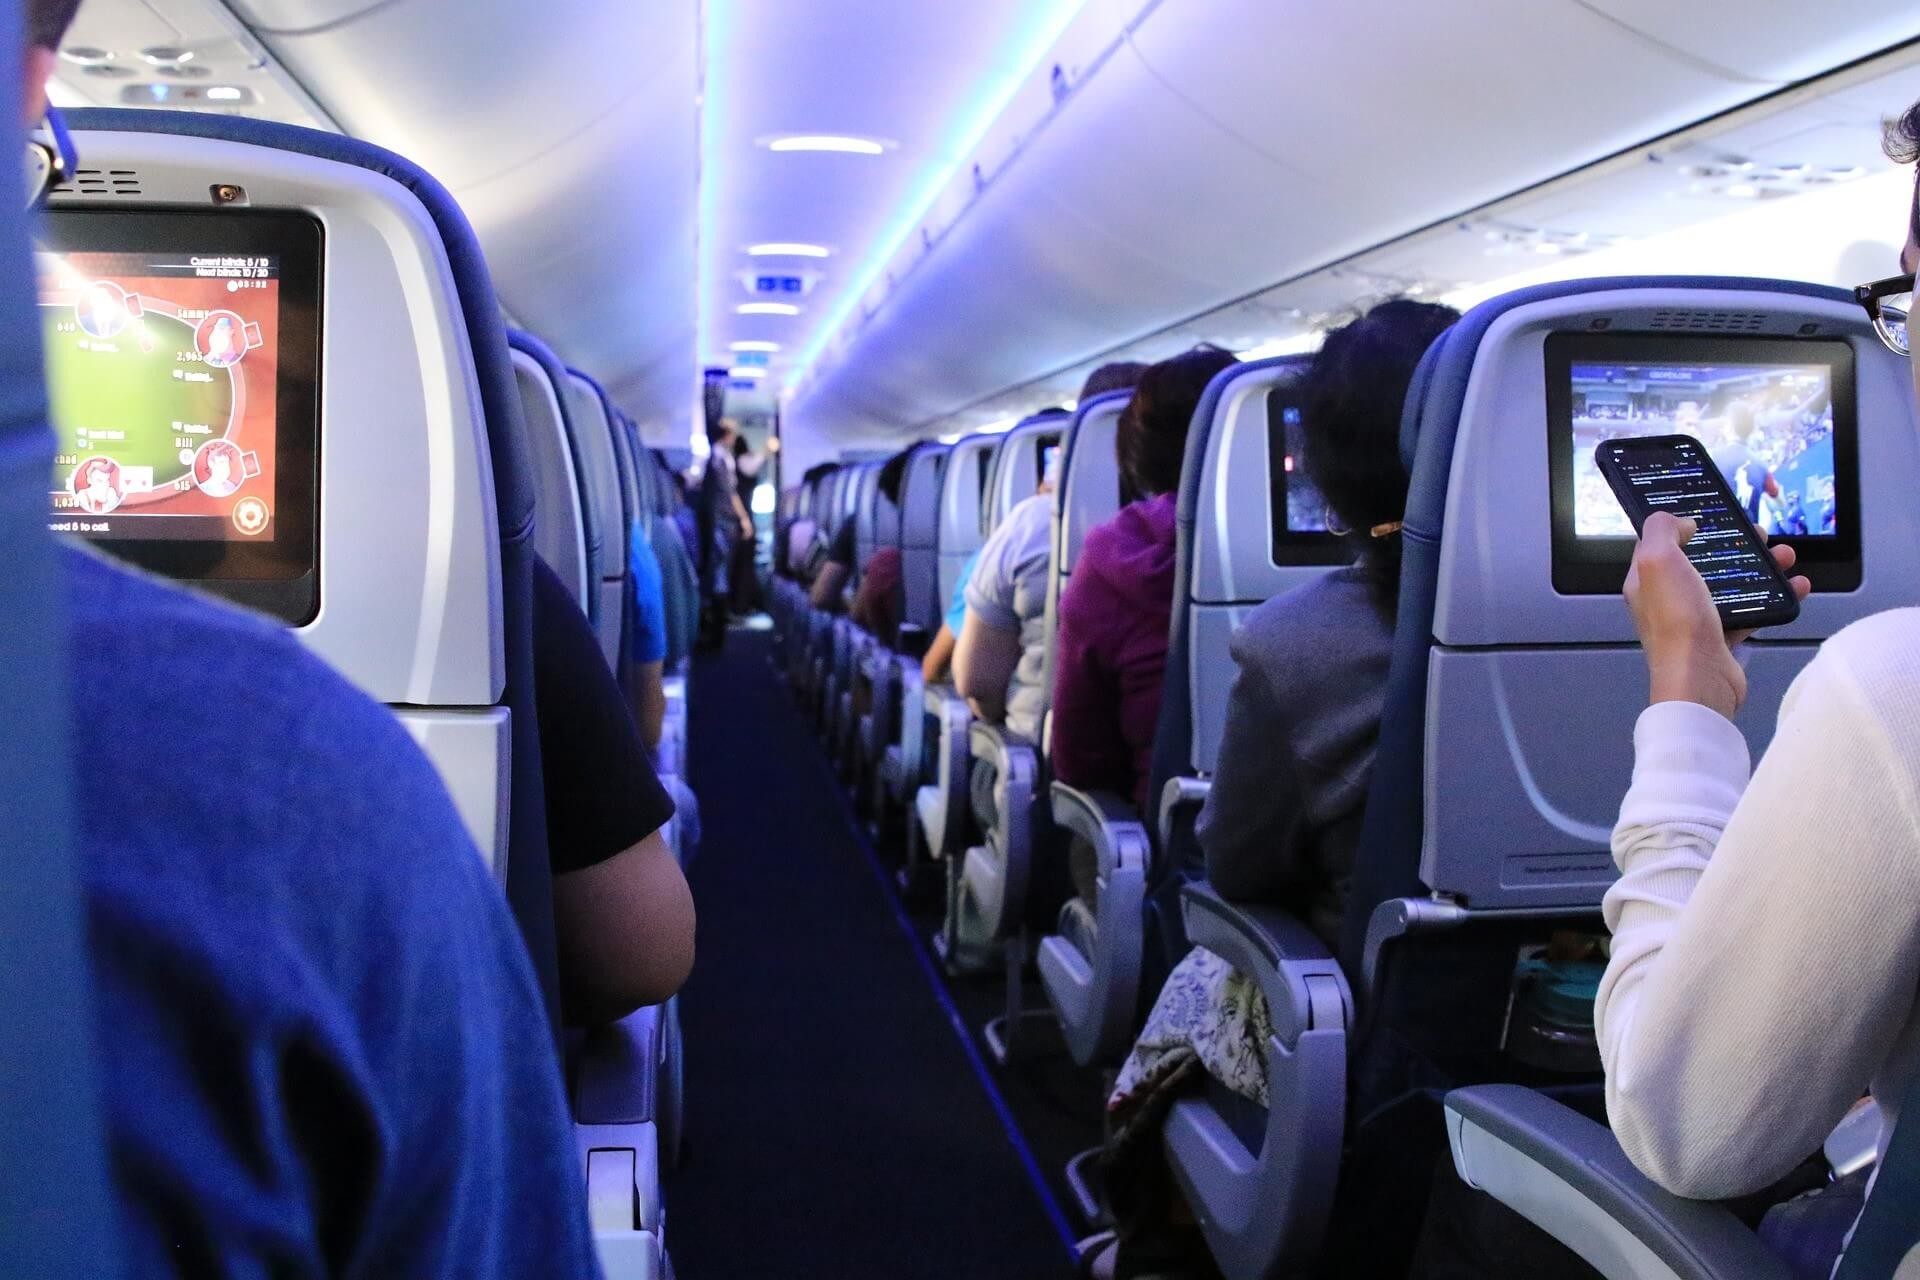 Passangers on an airplane, the view is down the centre aisle.